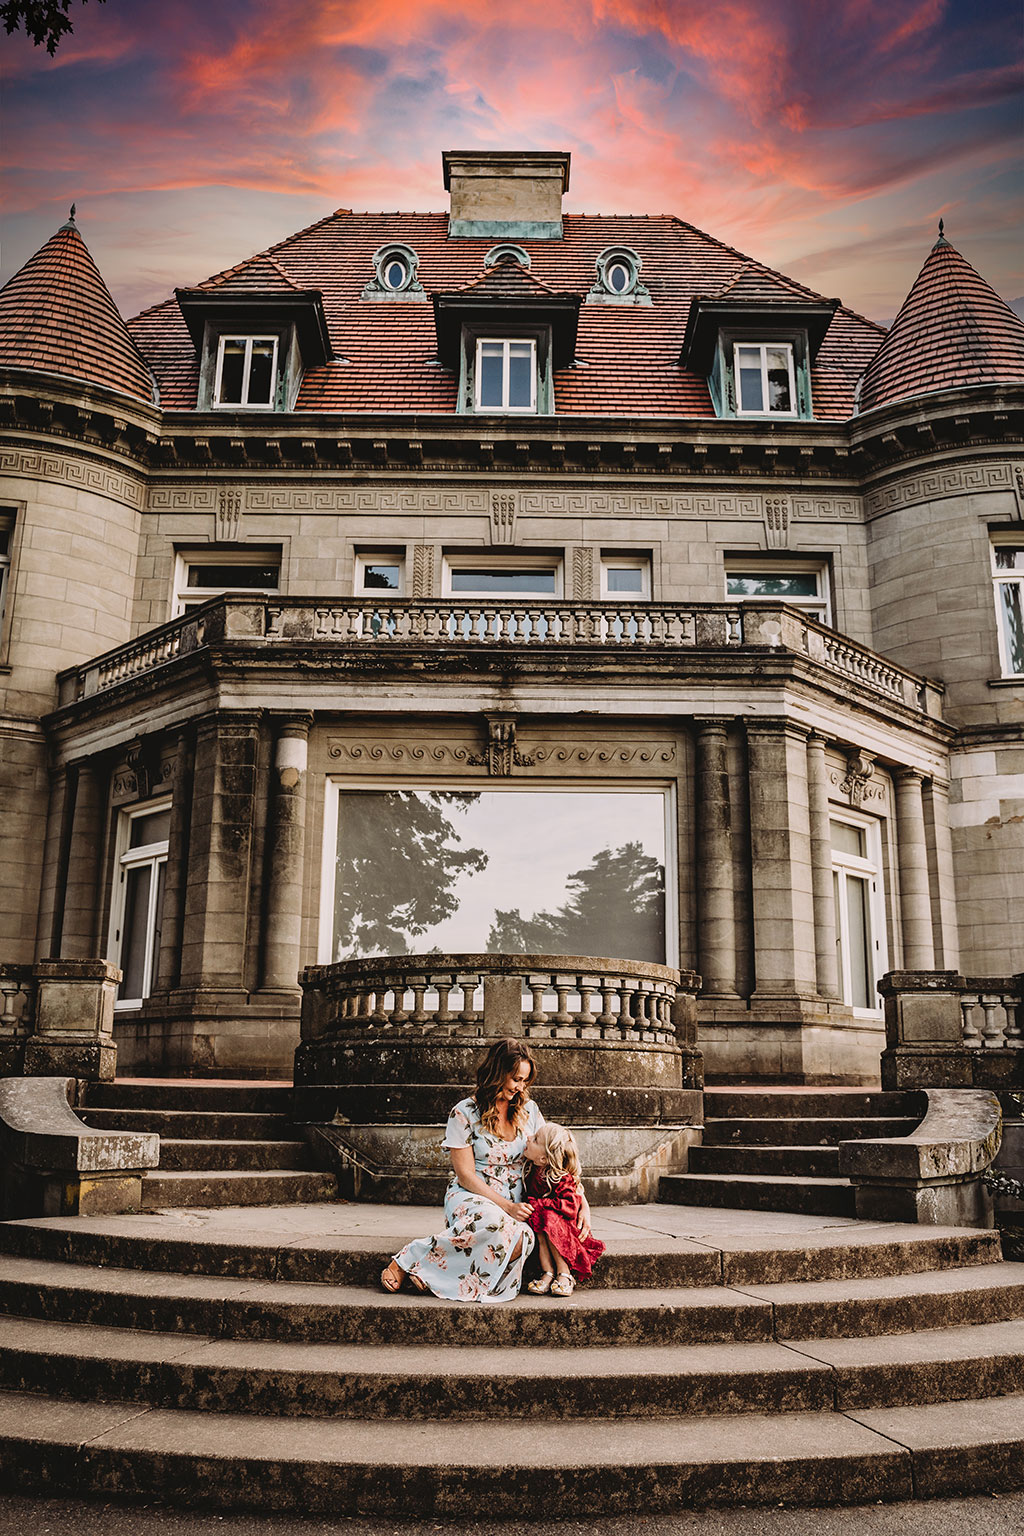 Family Photography by Natalie Broders at Pittock Mansion in Portland, OR - June